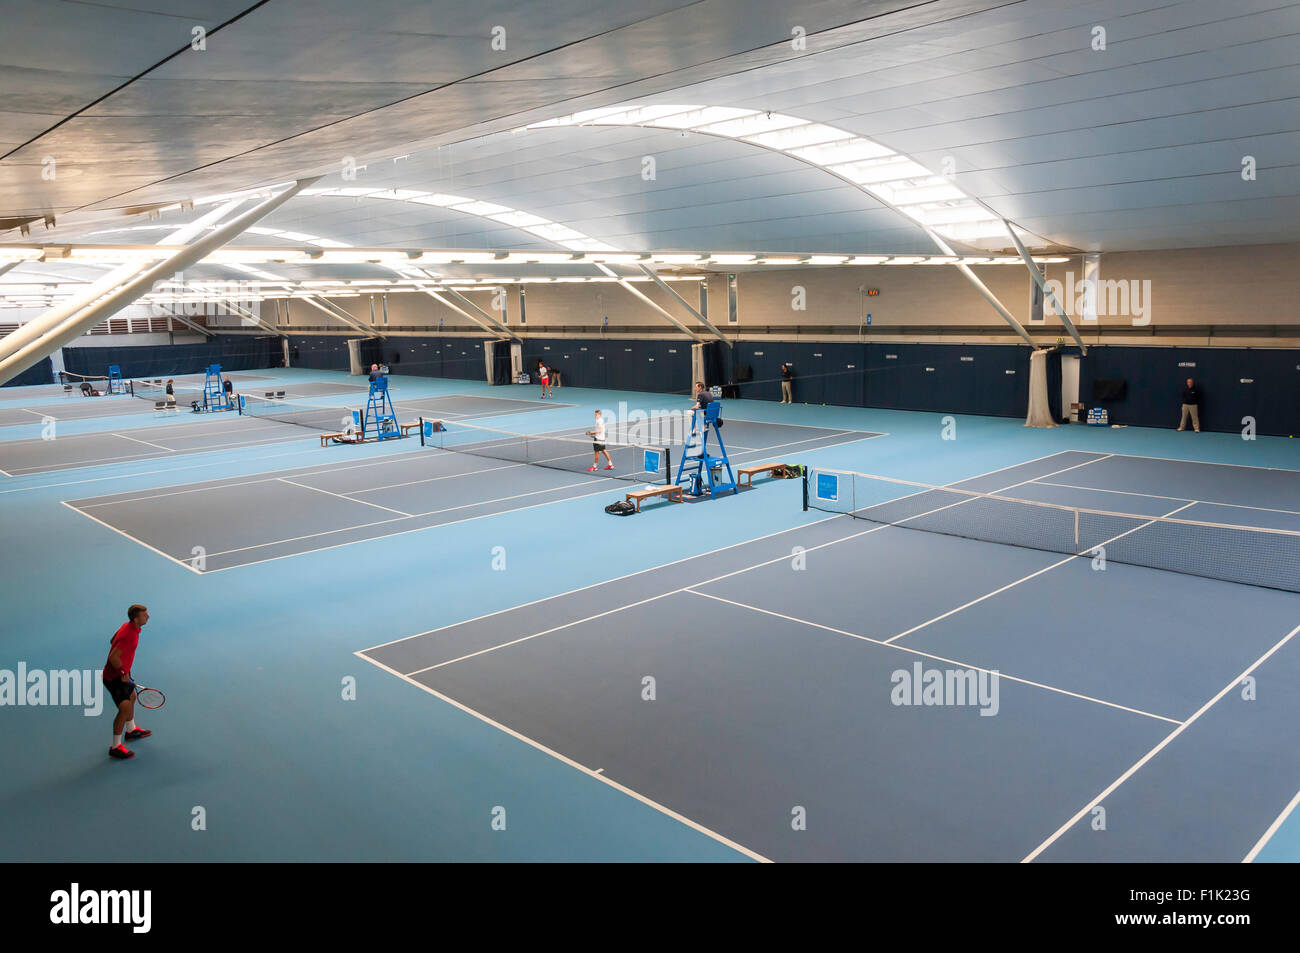 Indoor courts, National Tennis Centre, Priory Lane, Roehampton, London Borough of Wandsworth, Greater London, England, United Kingdom Stock Photo